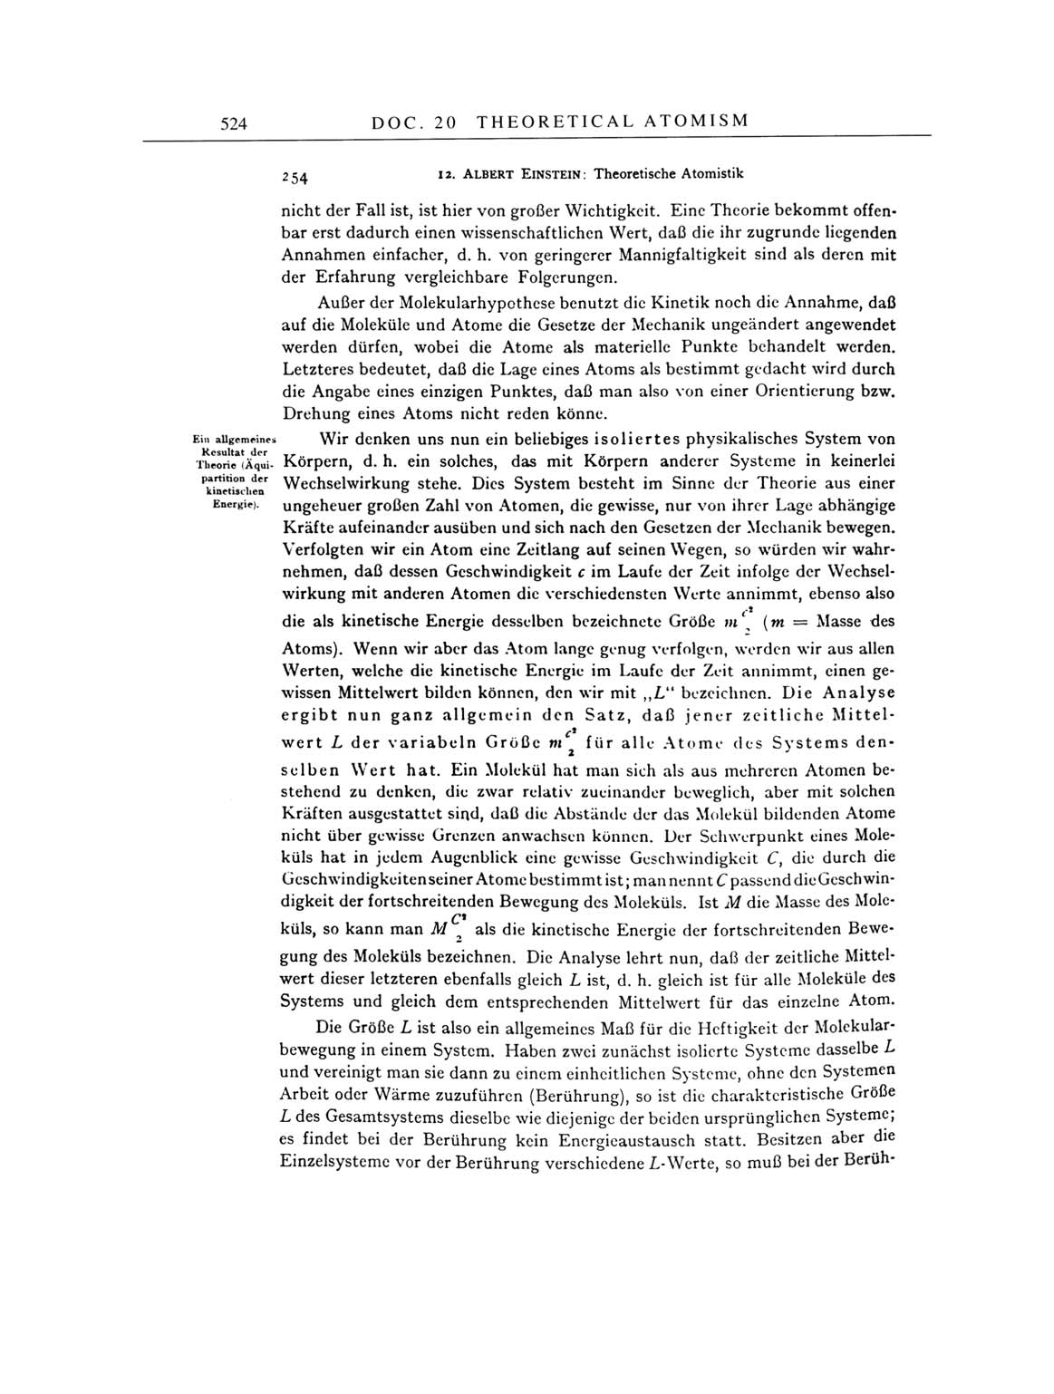 Volume 4: The Swiss Years: Writings 1912-1914 page 524